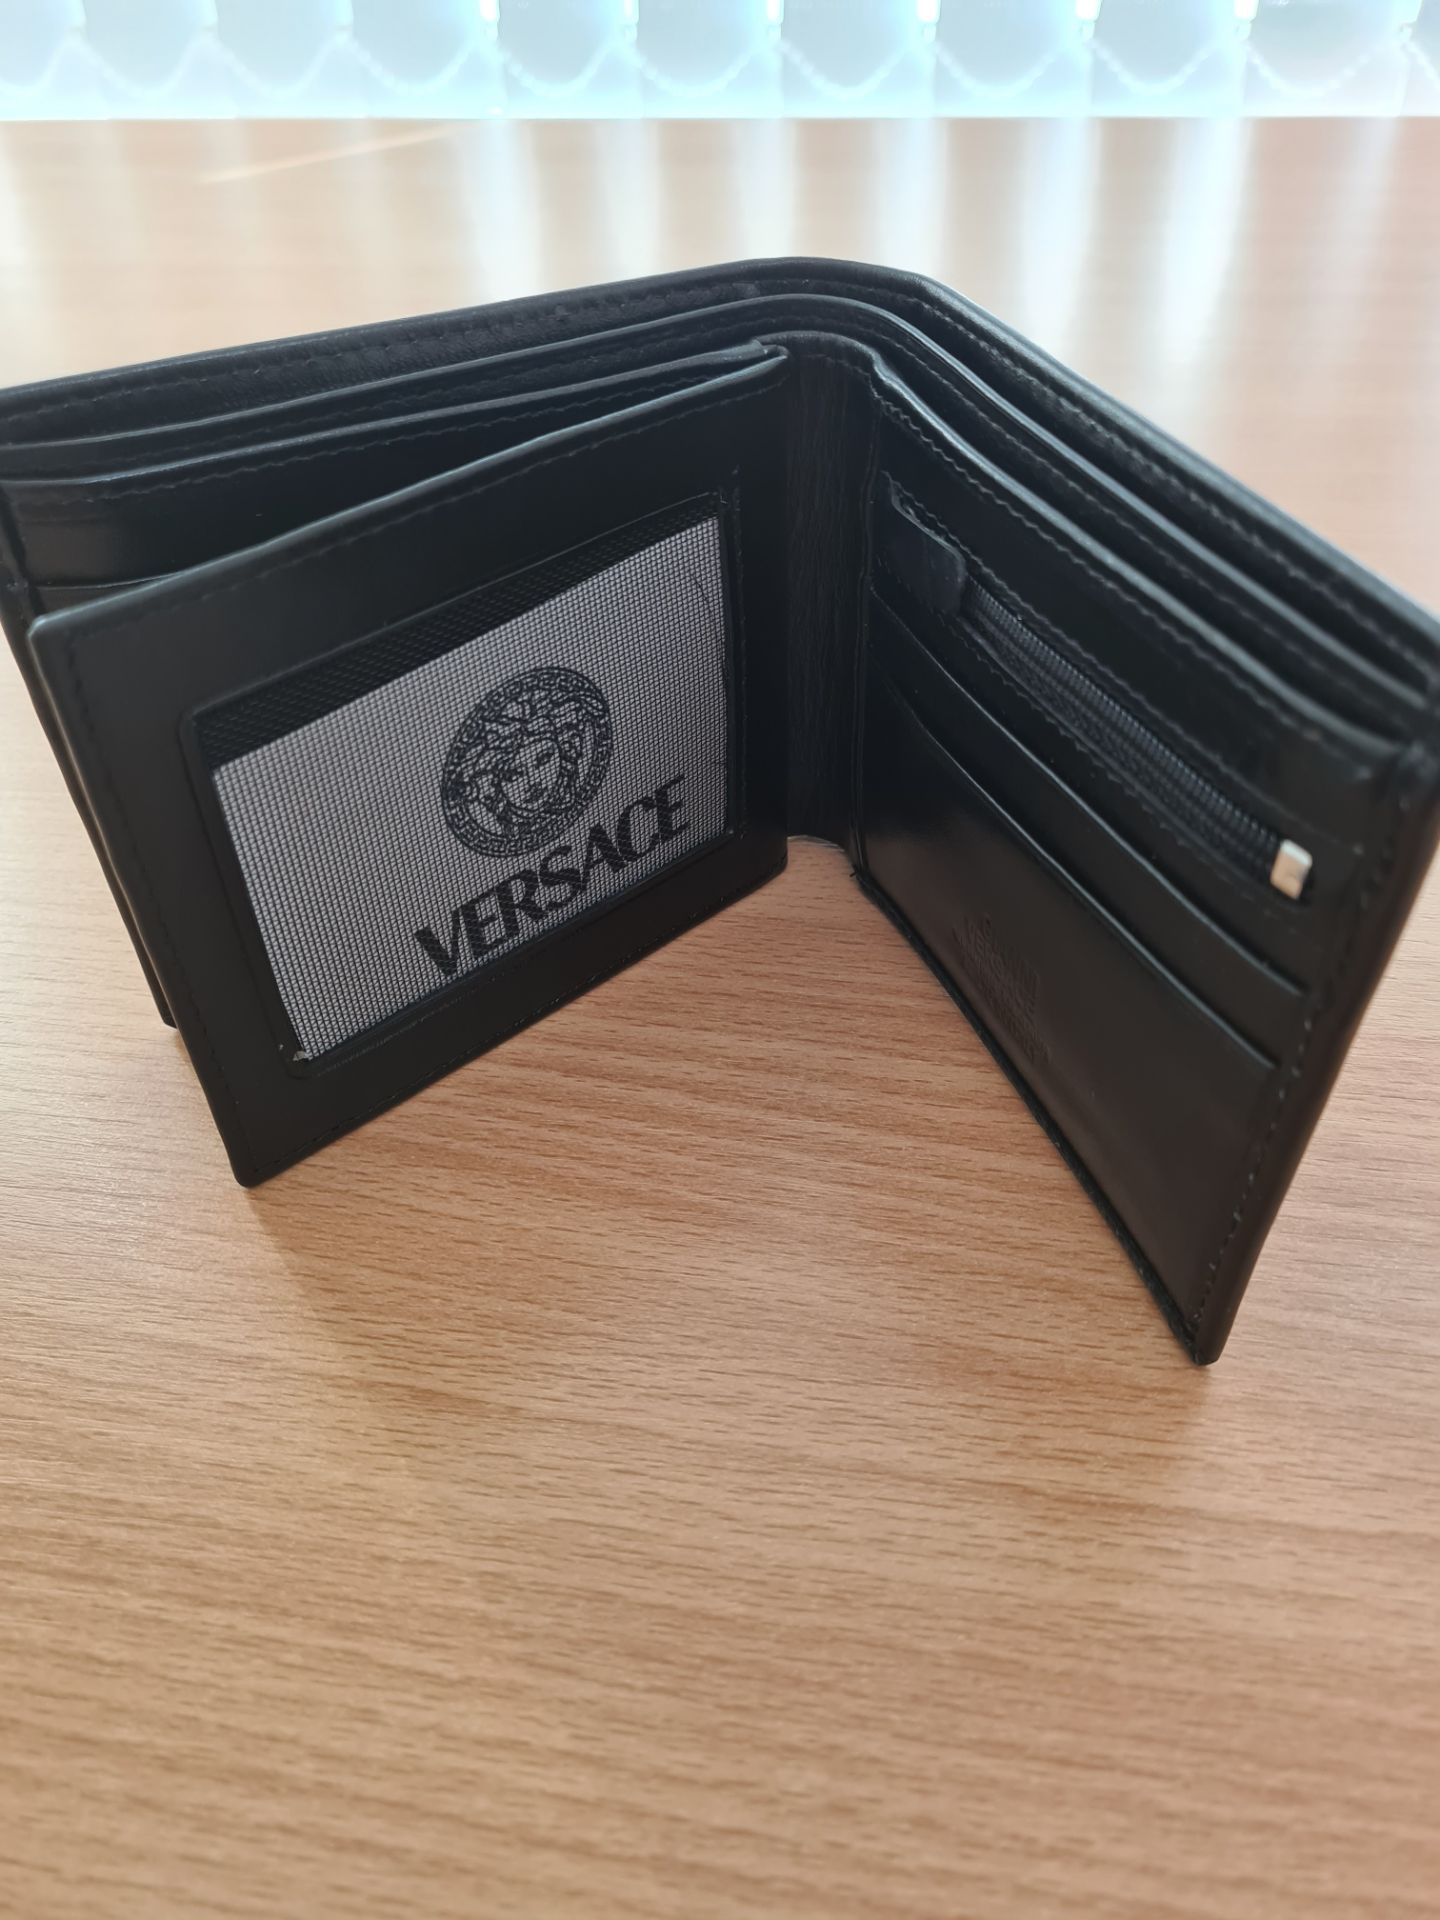 versace men's leather wallet - new with box - Image 7 of 7